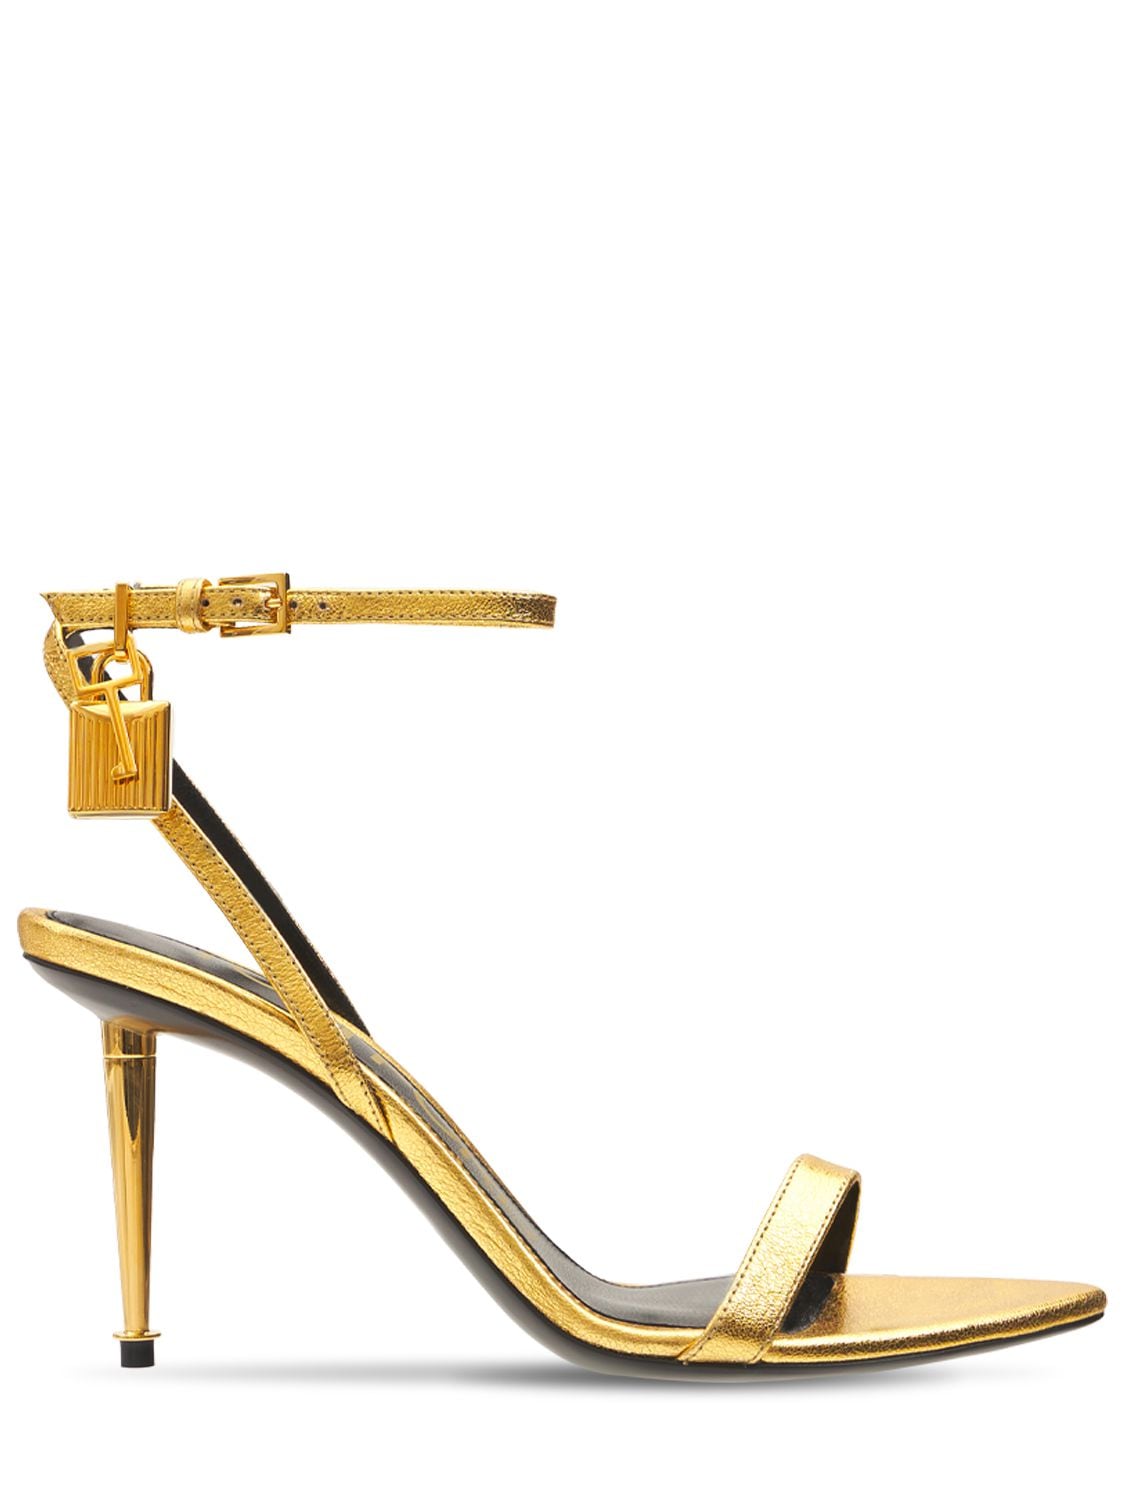 Tom Ford 85mm Padlock Metallic Leather Sandals In Gold | ModeSens